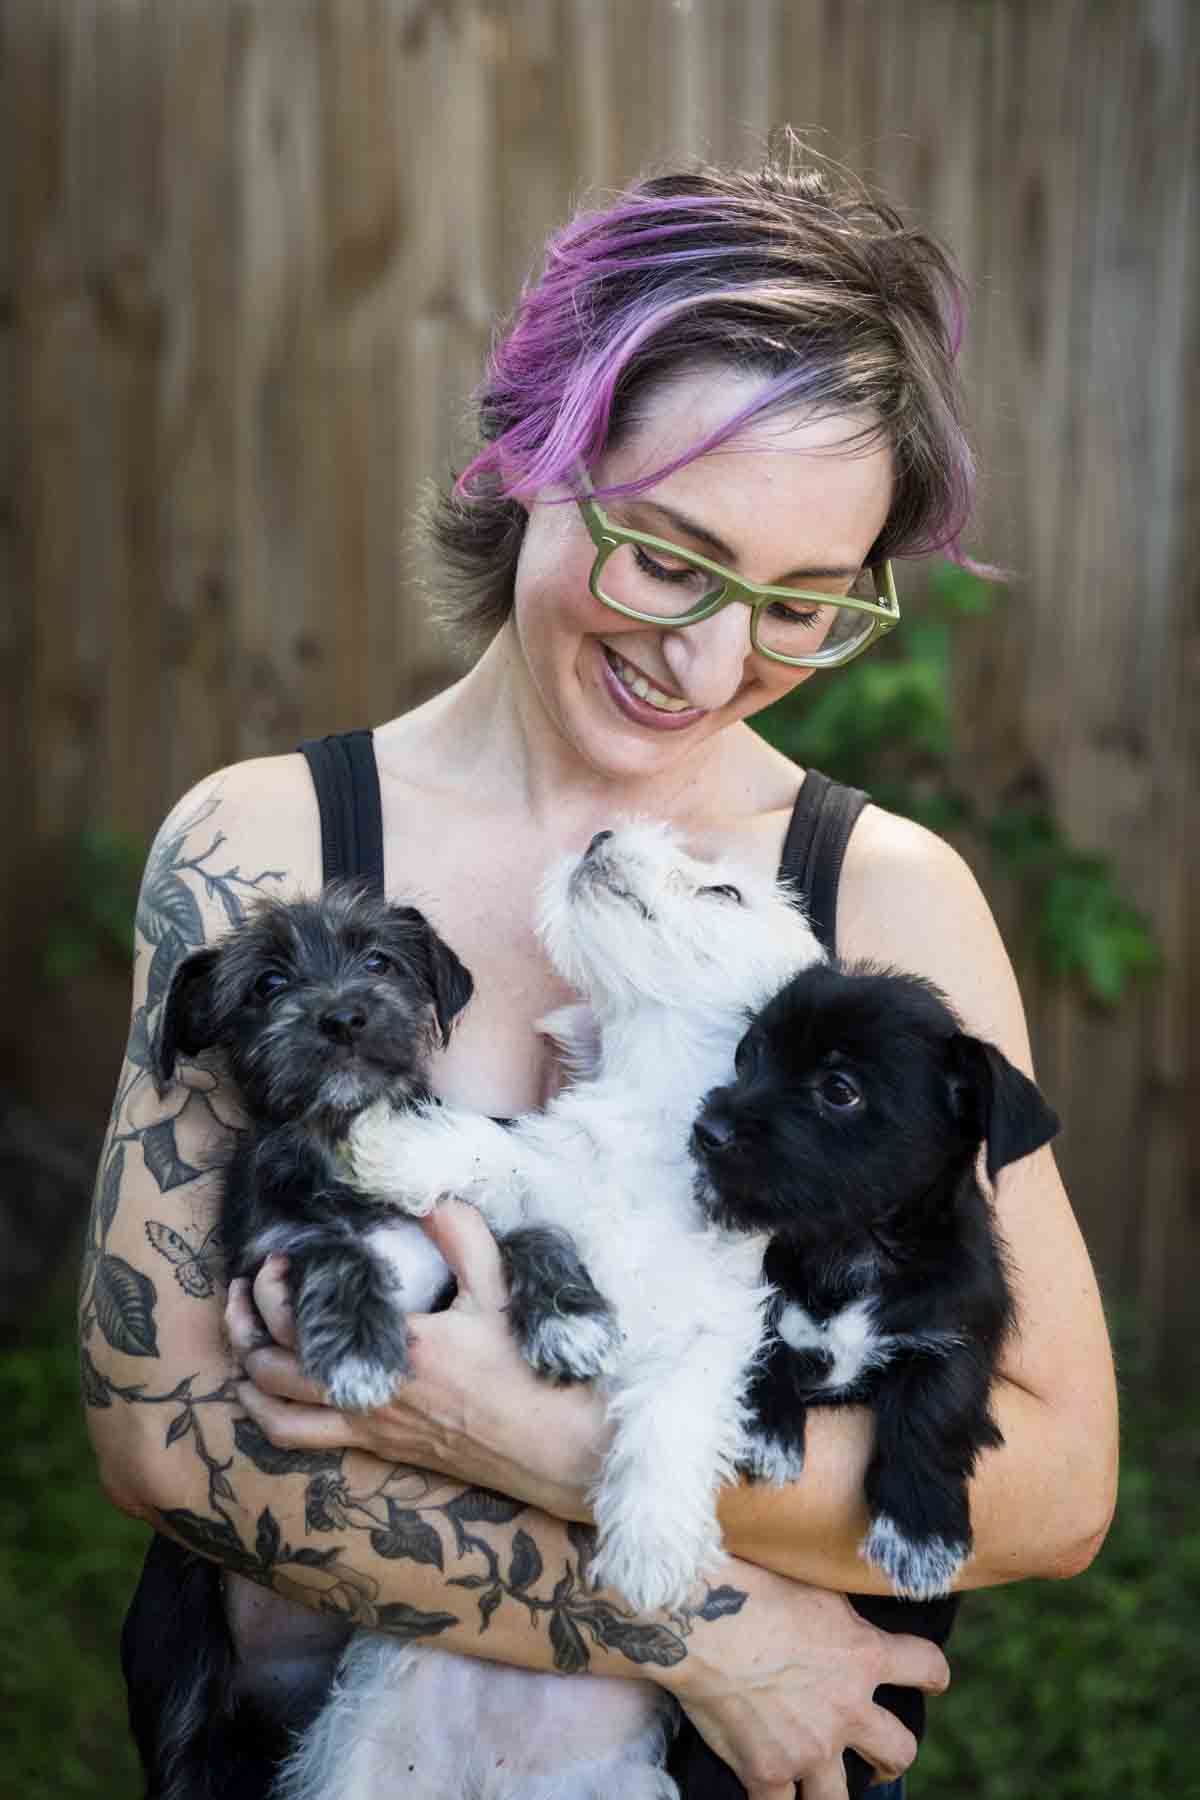 Woman with purple hair and glasses holding three puppies for an article on pet photo tips